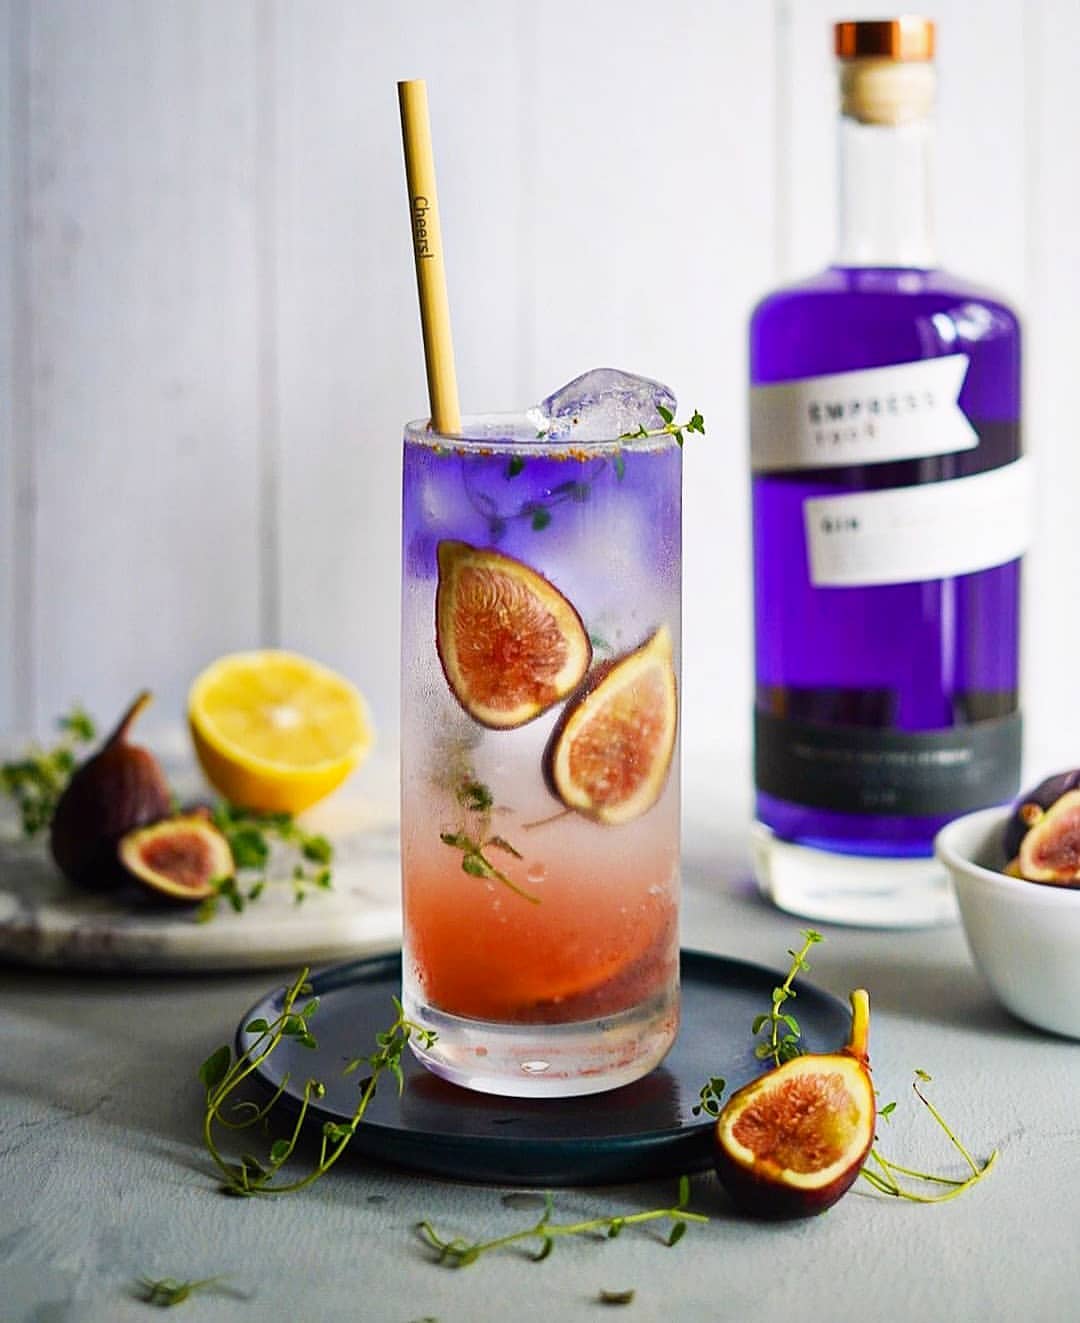 It's Thyme To Dream - Easy Cocktails With Gin Spirits